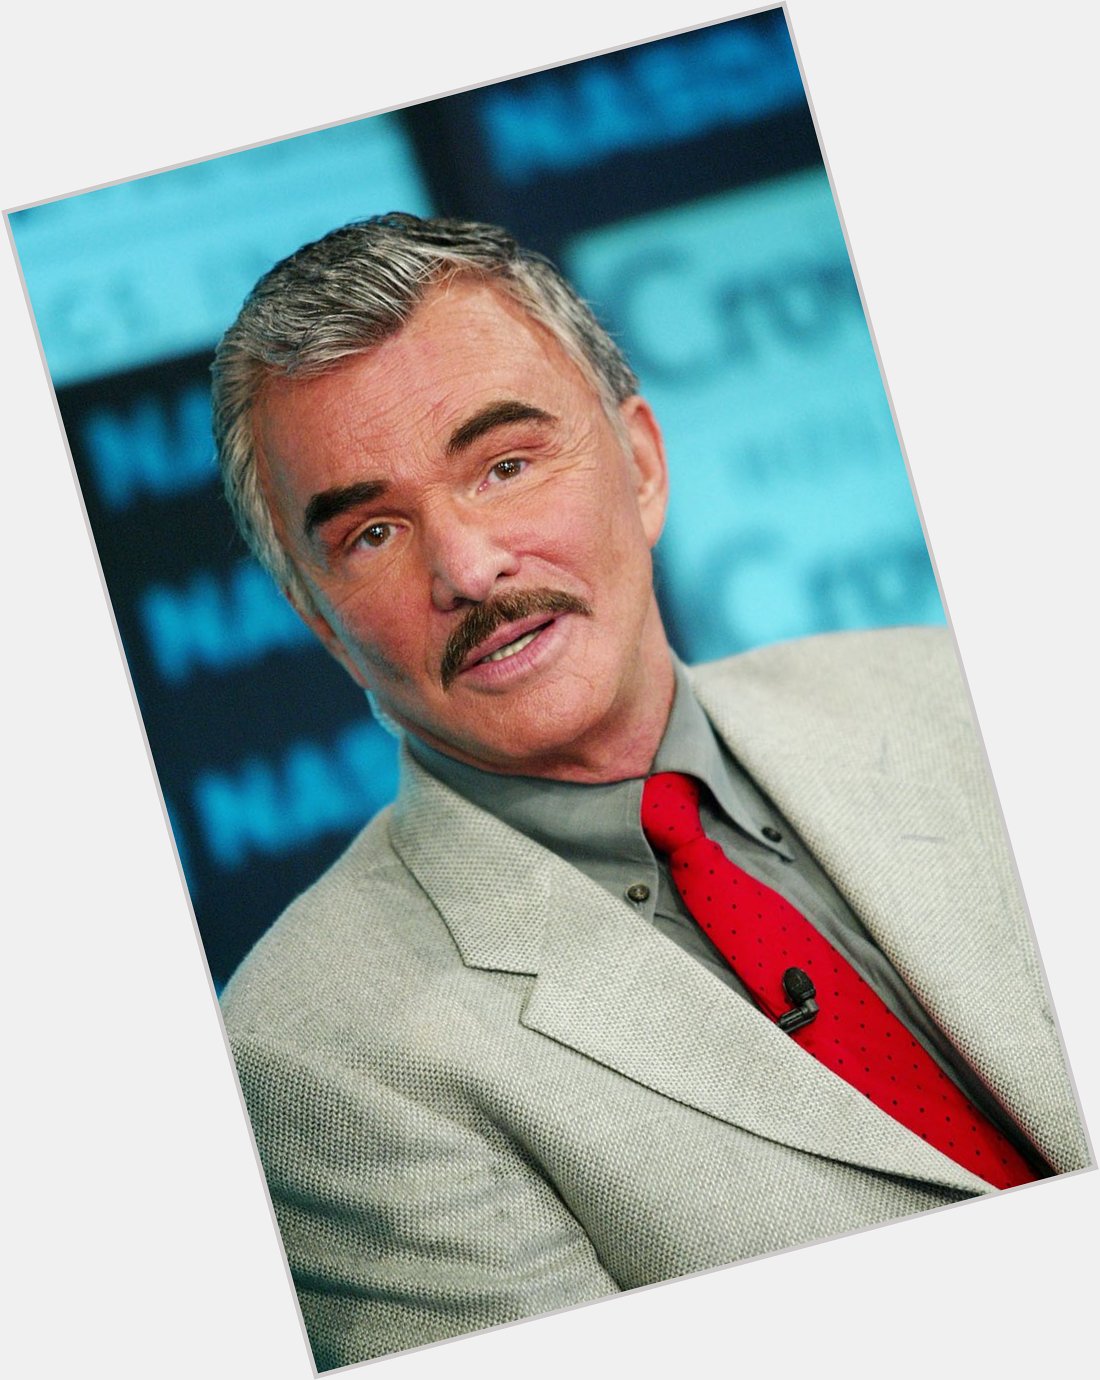 Happy Birthday to the late Burt Reynolds who would\ve turned 86 today. 